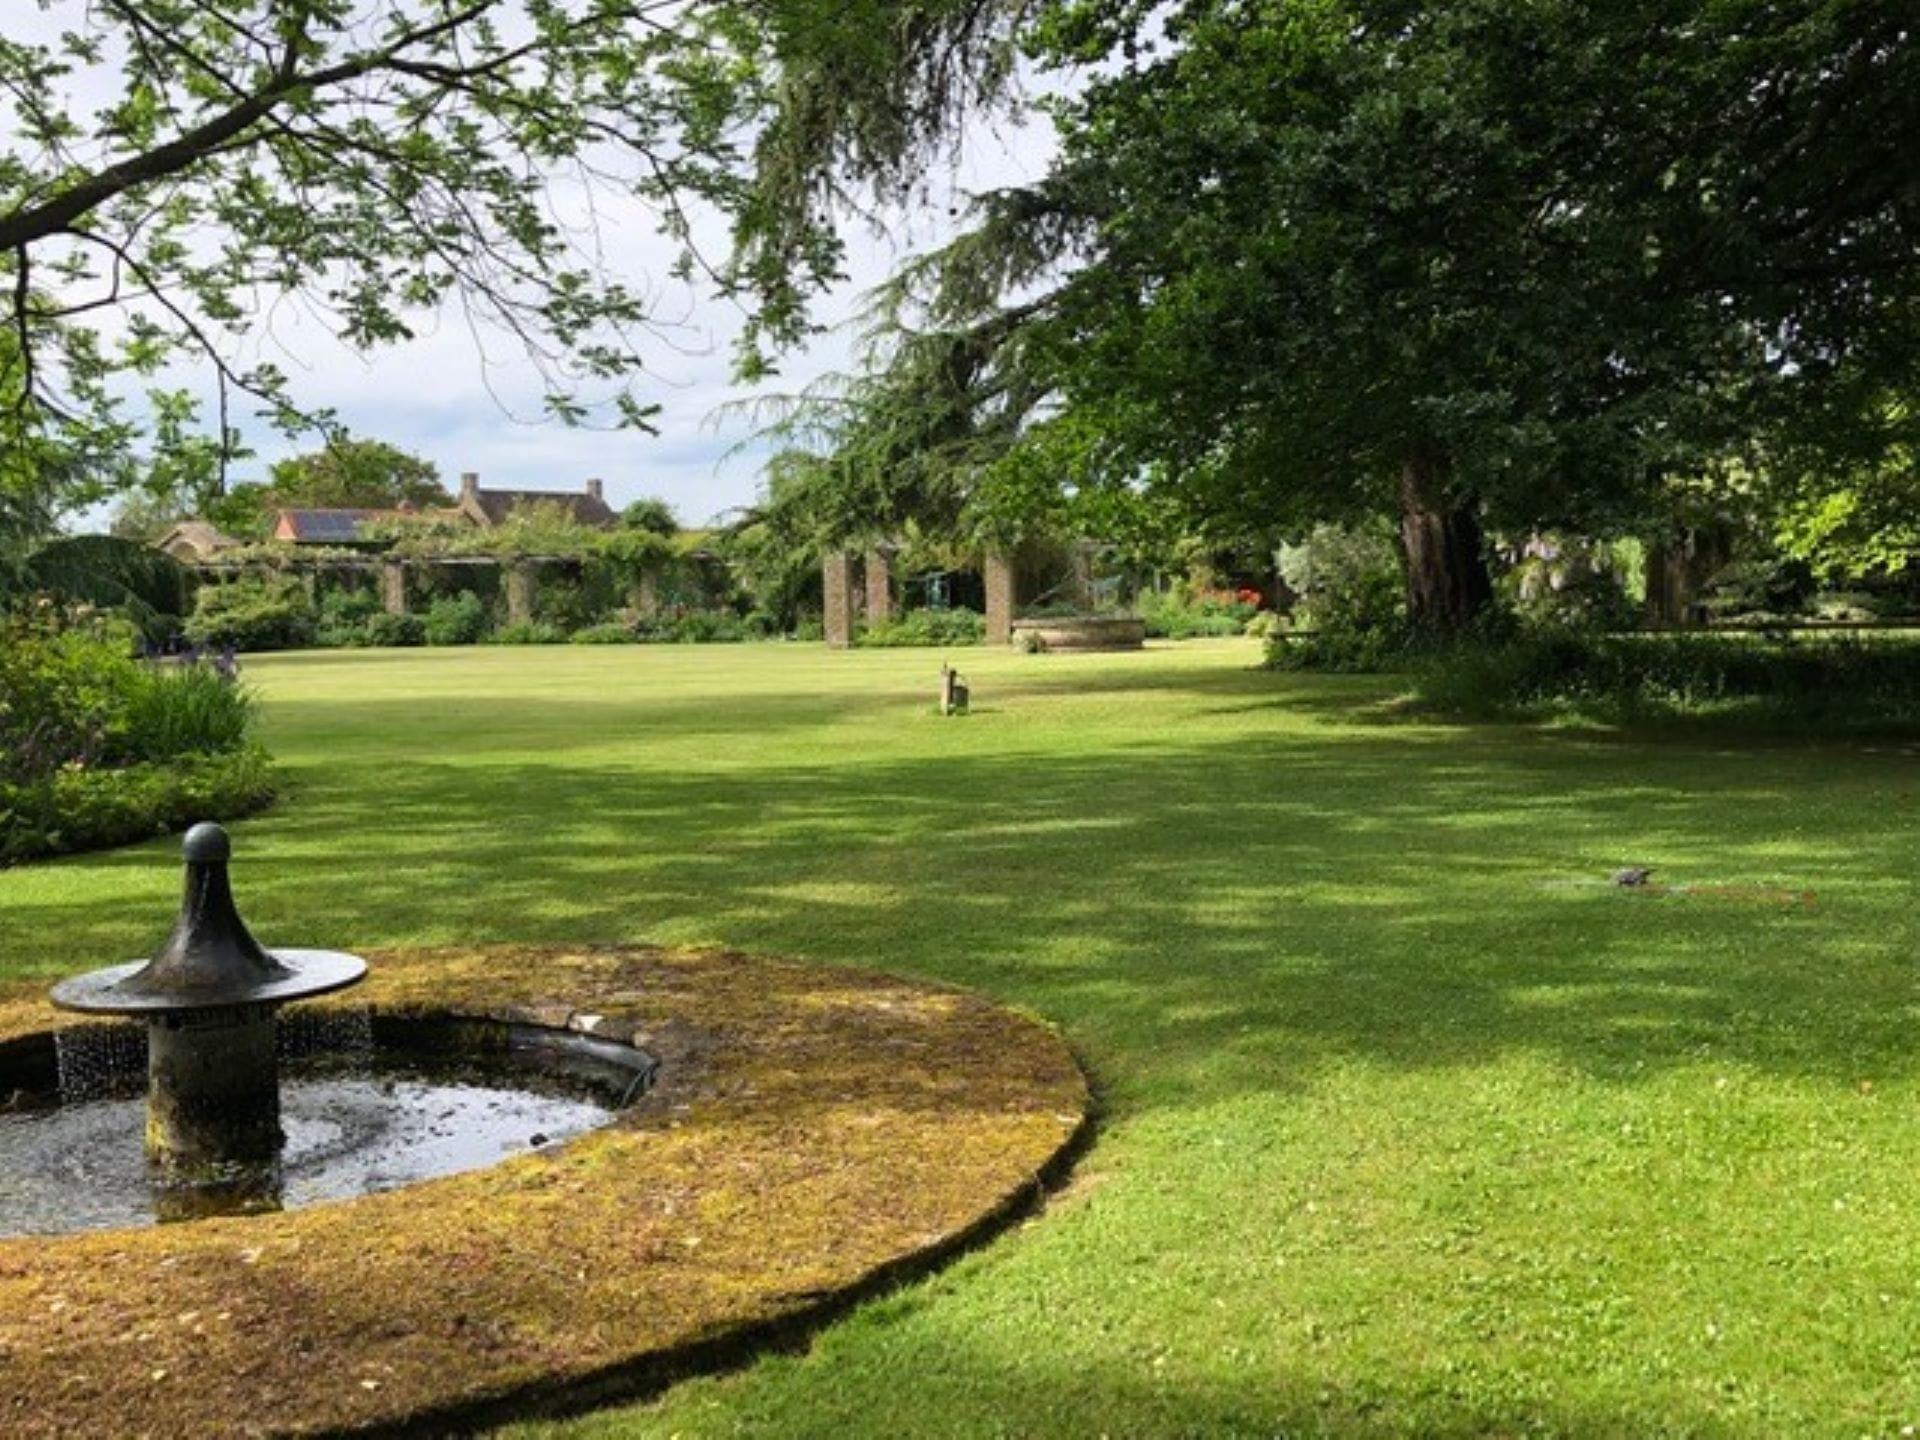 A garden with a pool and sweeping lawn